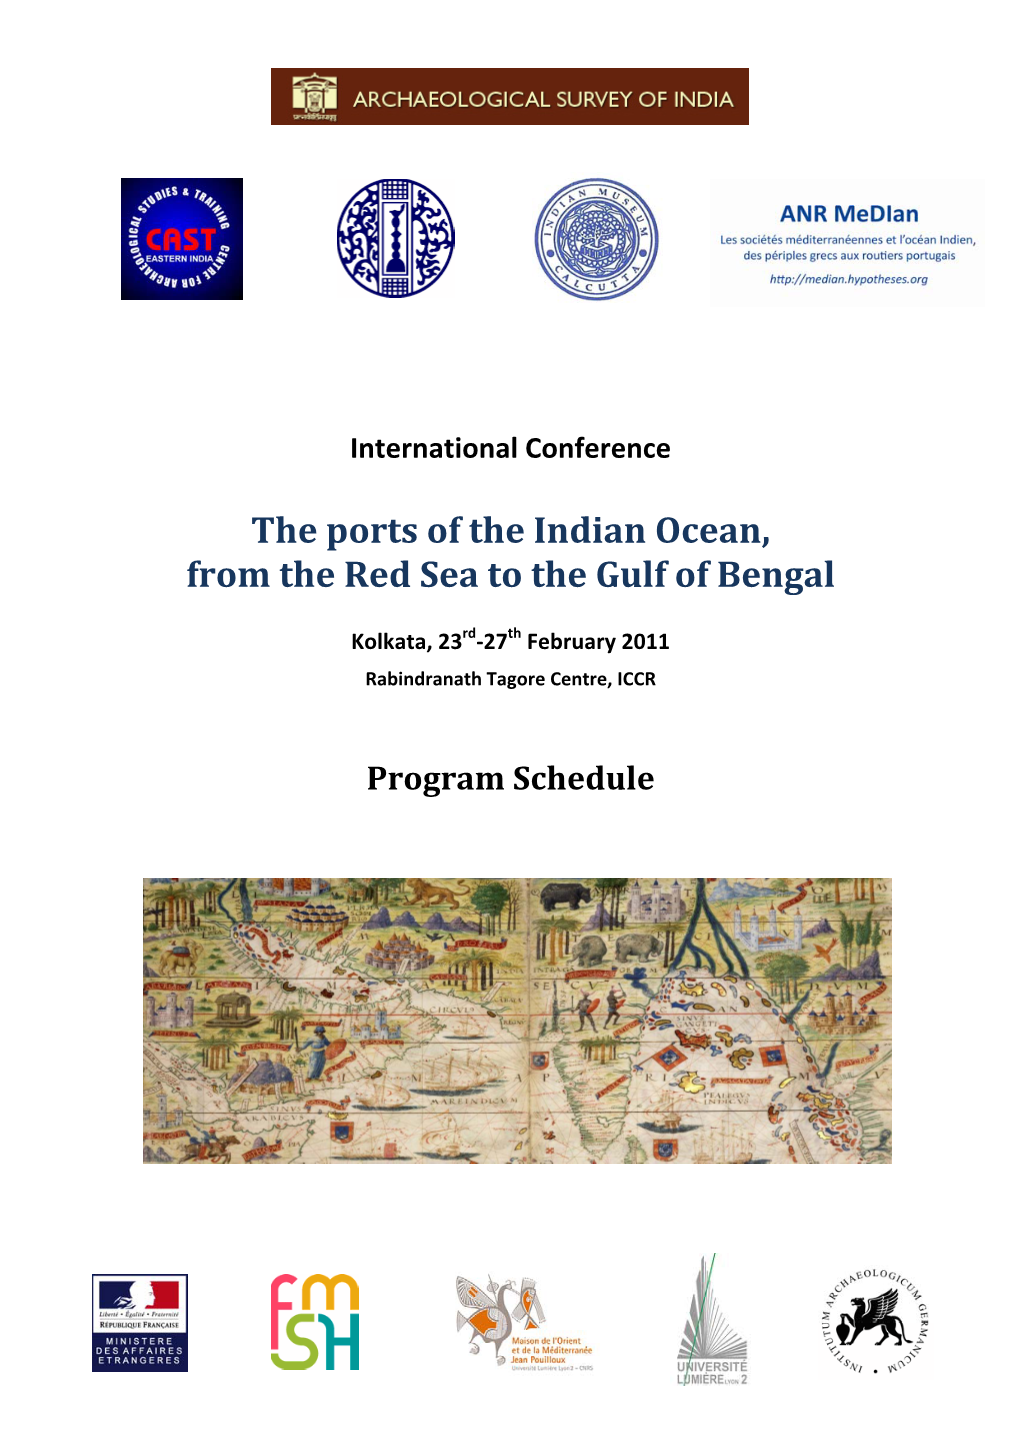 The Ports of the Indian Ocean, from the Red Sea to the Gulf of Bengal